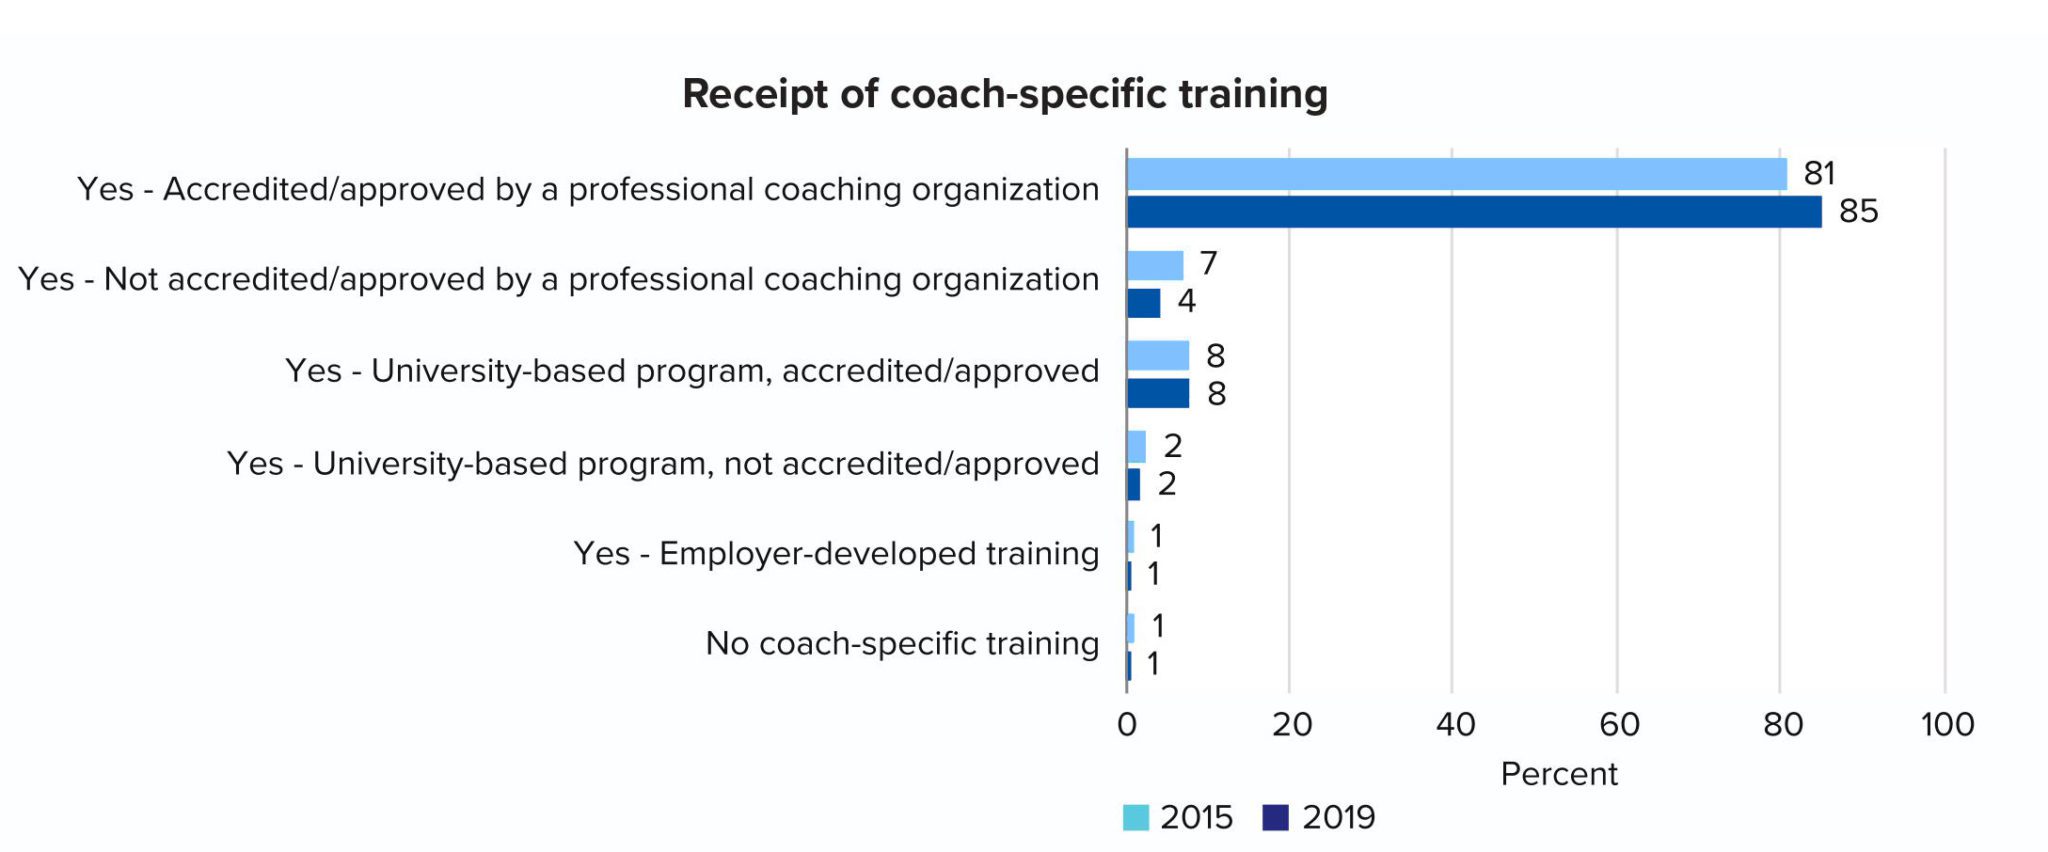 RECEIPT OF COACH-SPECIFIC TRAINING